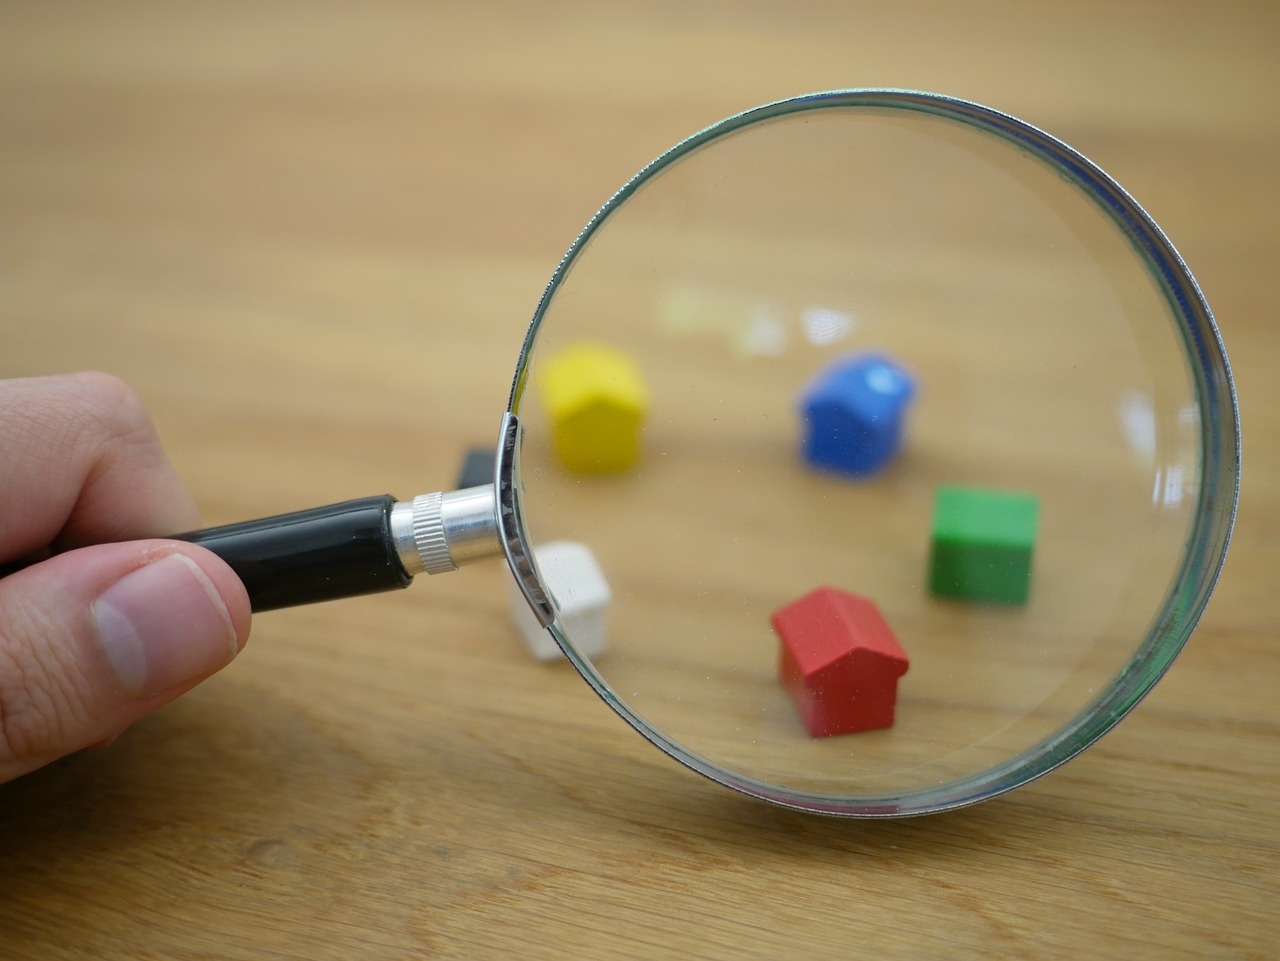 monopoly homes under microscope